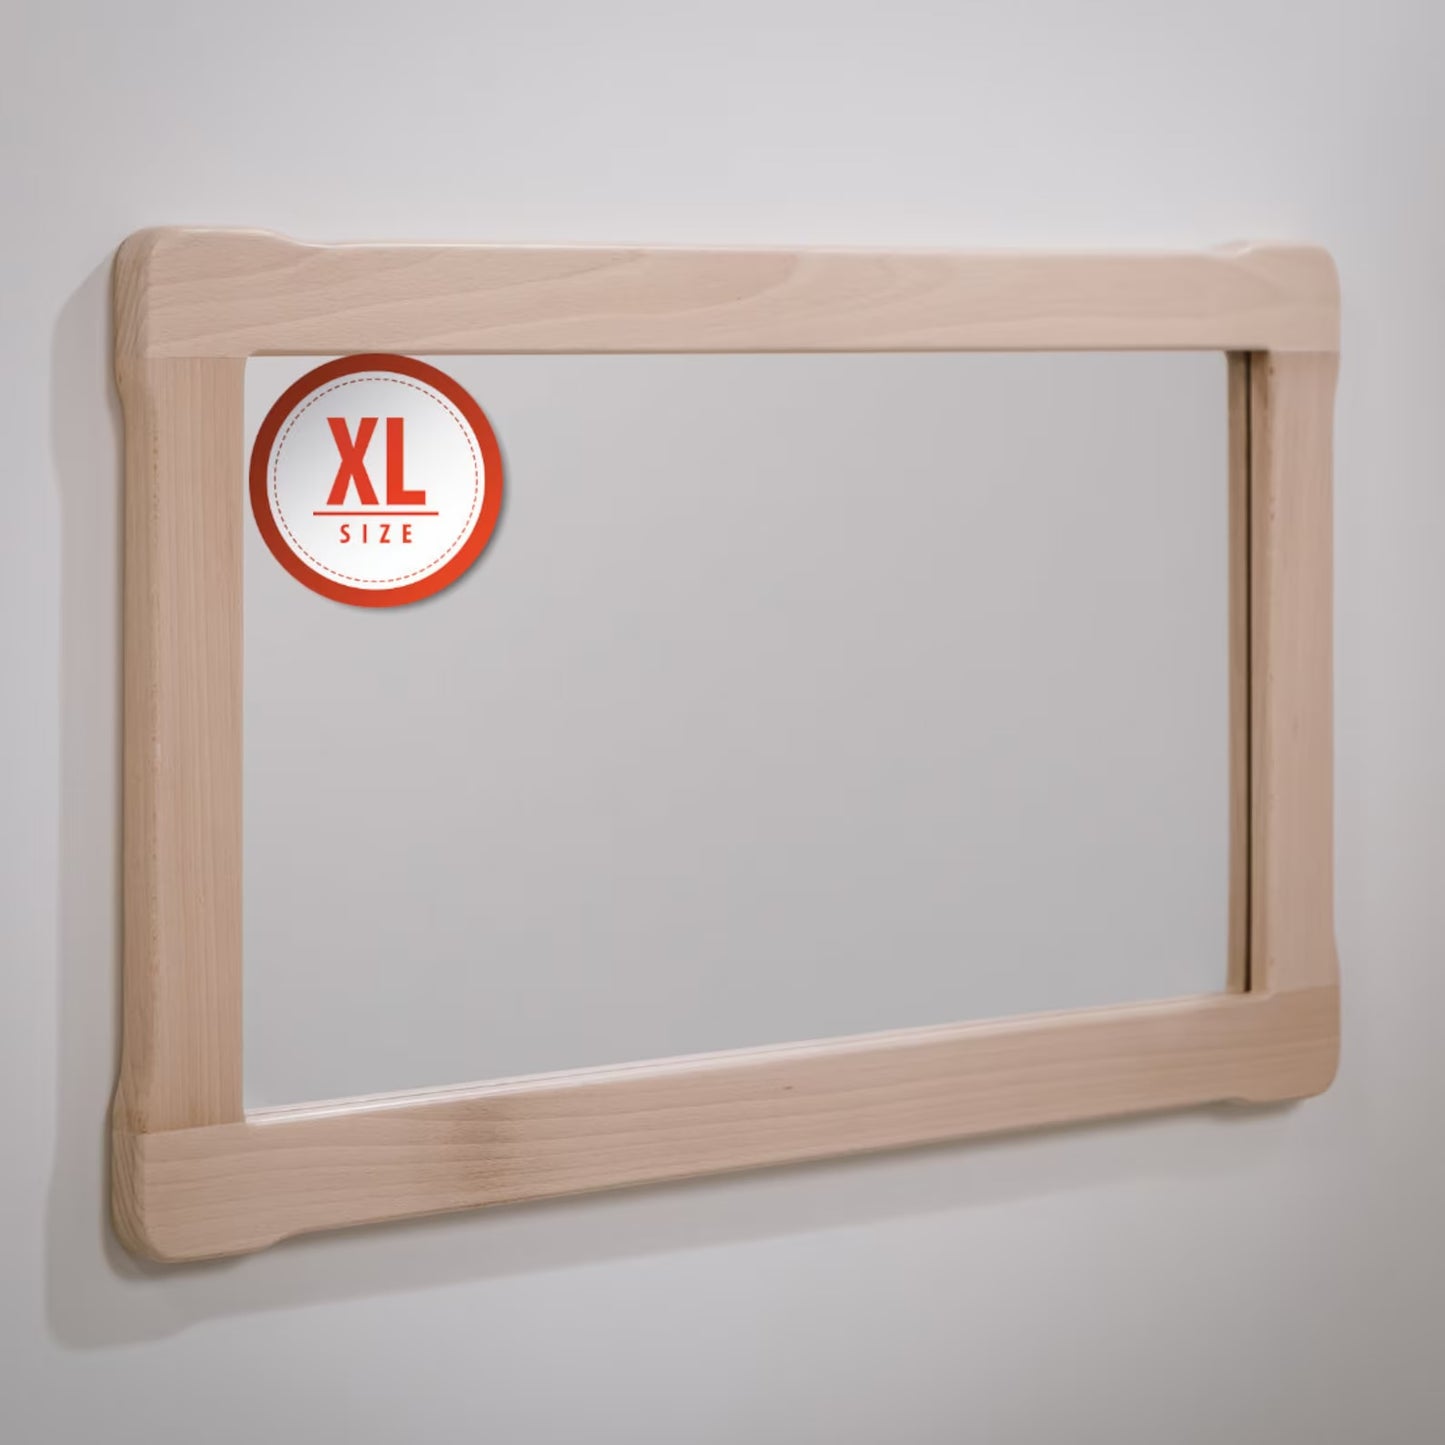 EXTRA LARGE Montessori mirror with EXTRA LONG bar